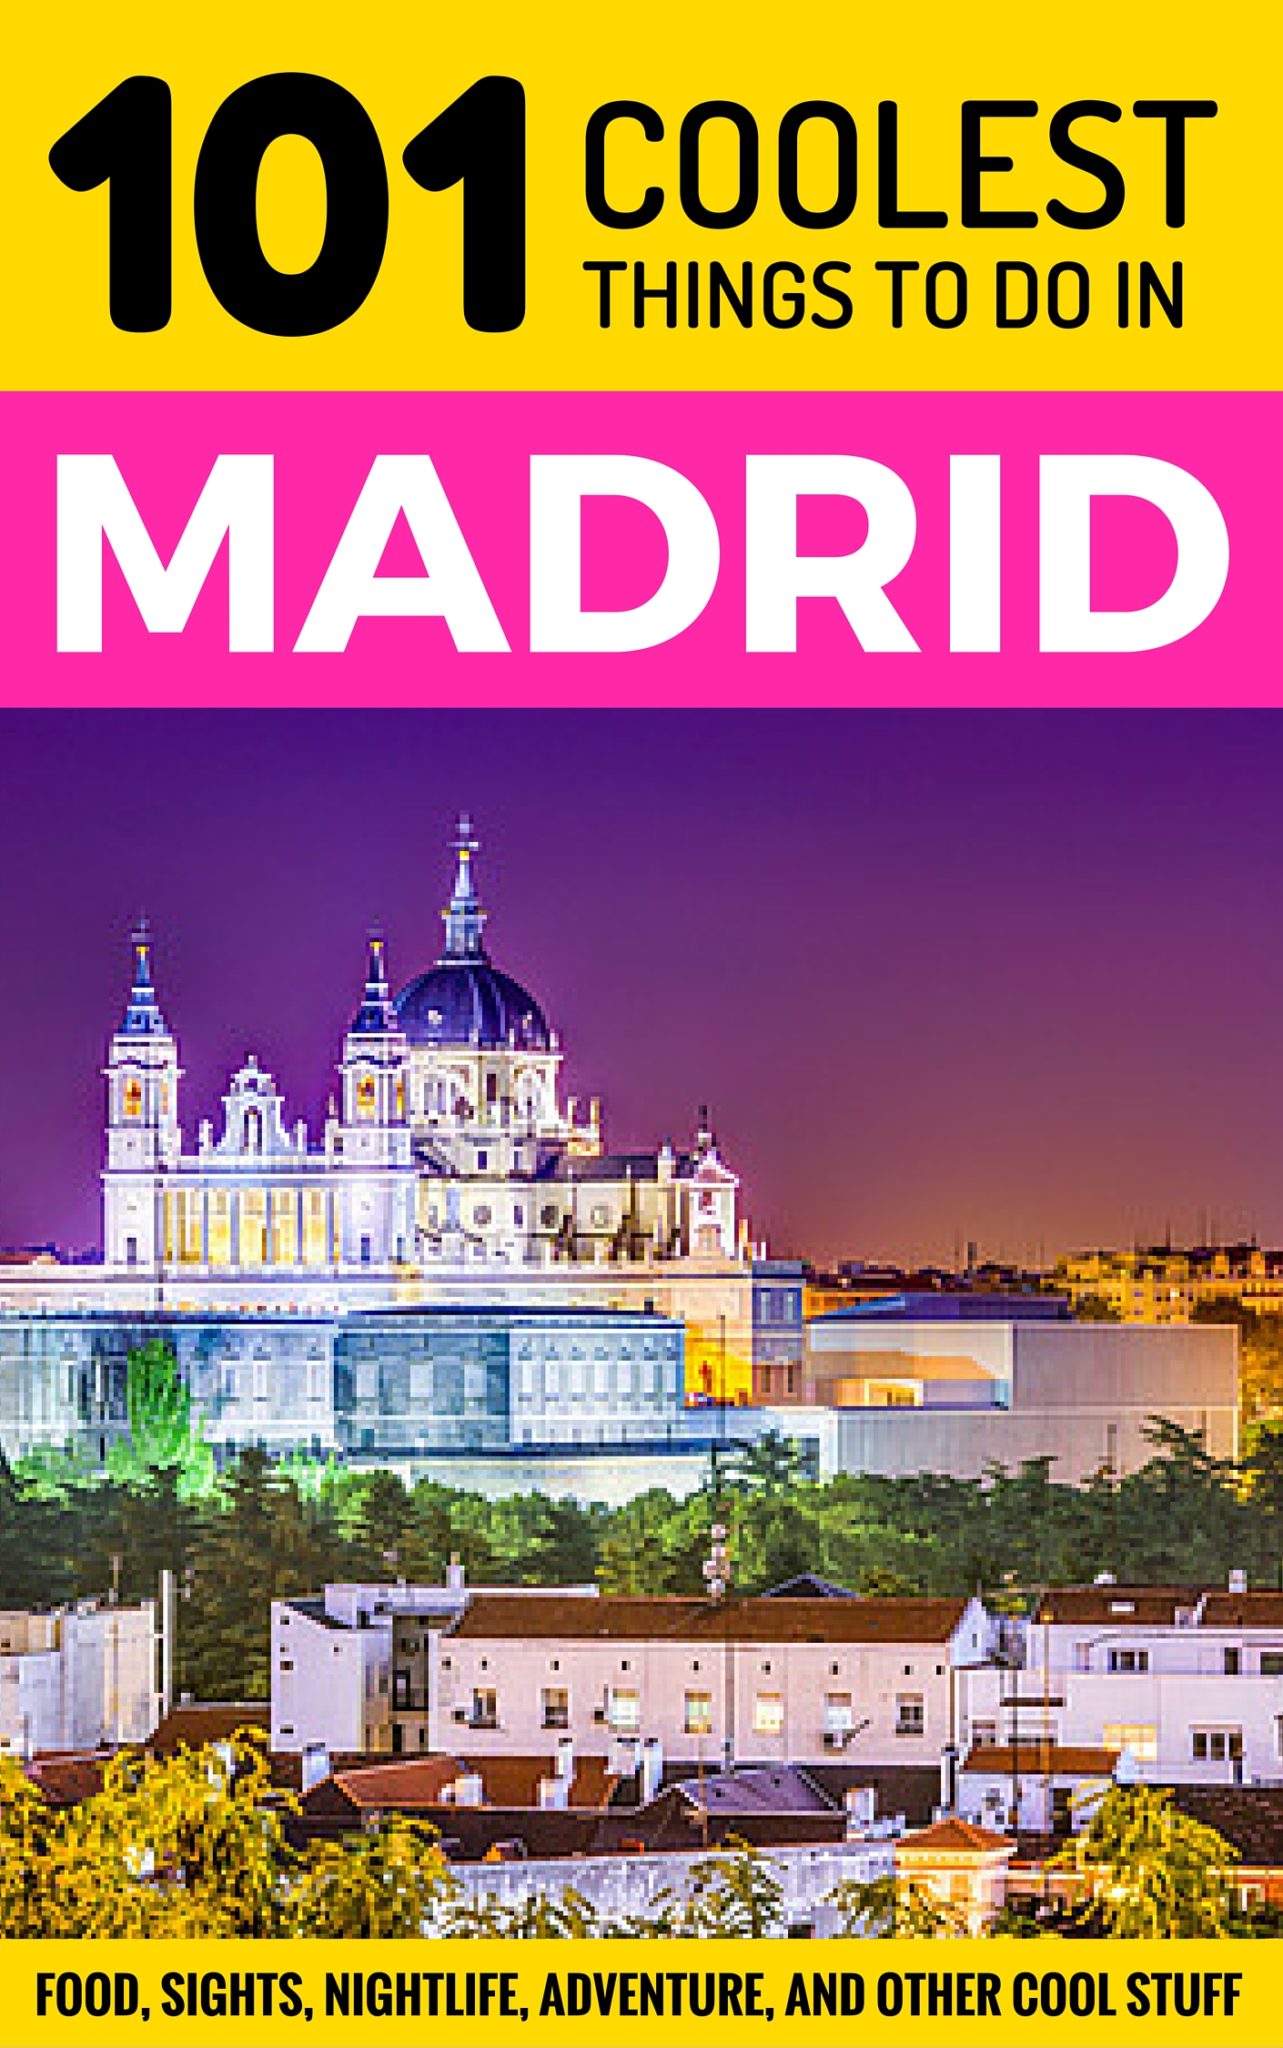 FREE: 101 Coolest Things to Do in Madrid by 101 Coolest Things